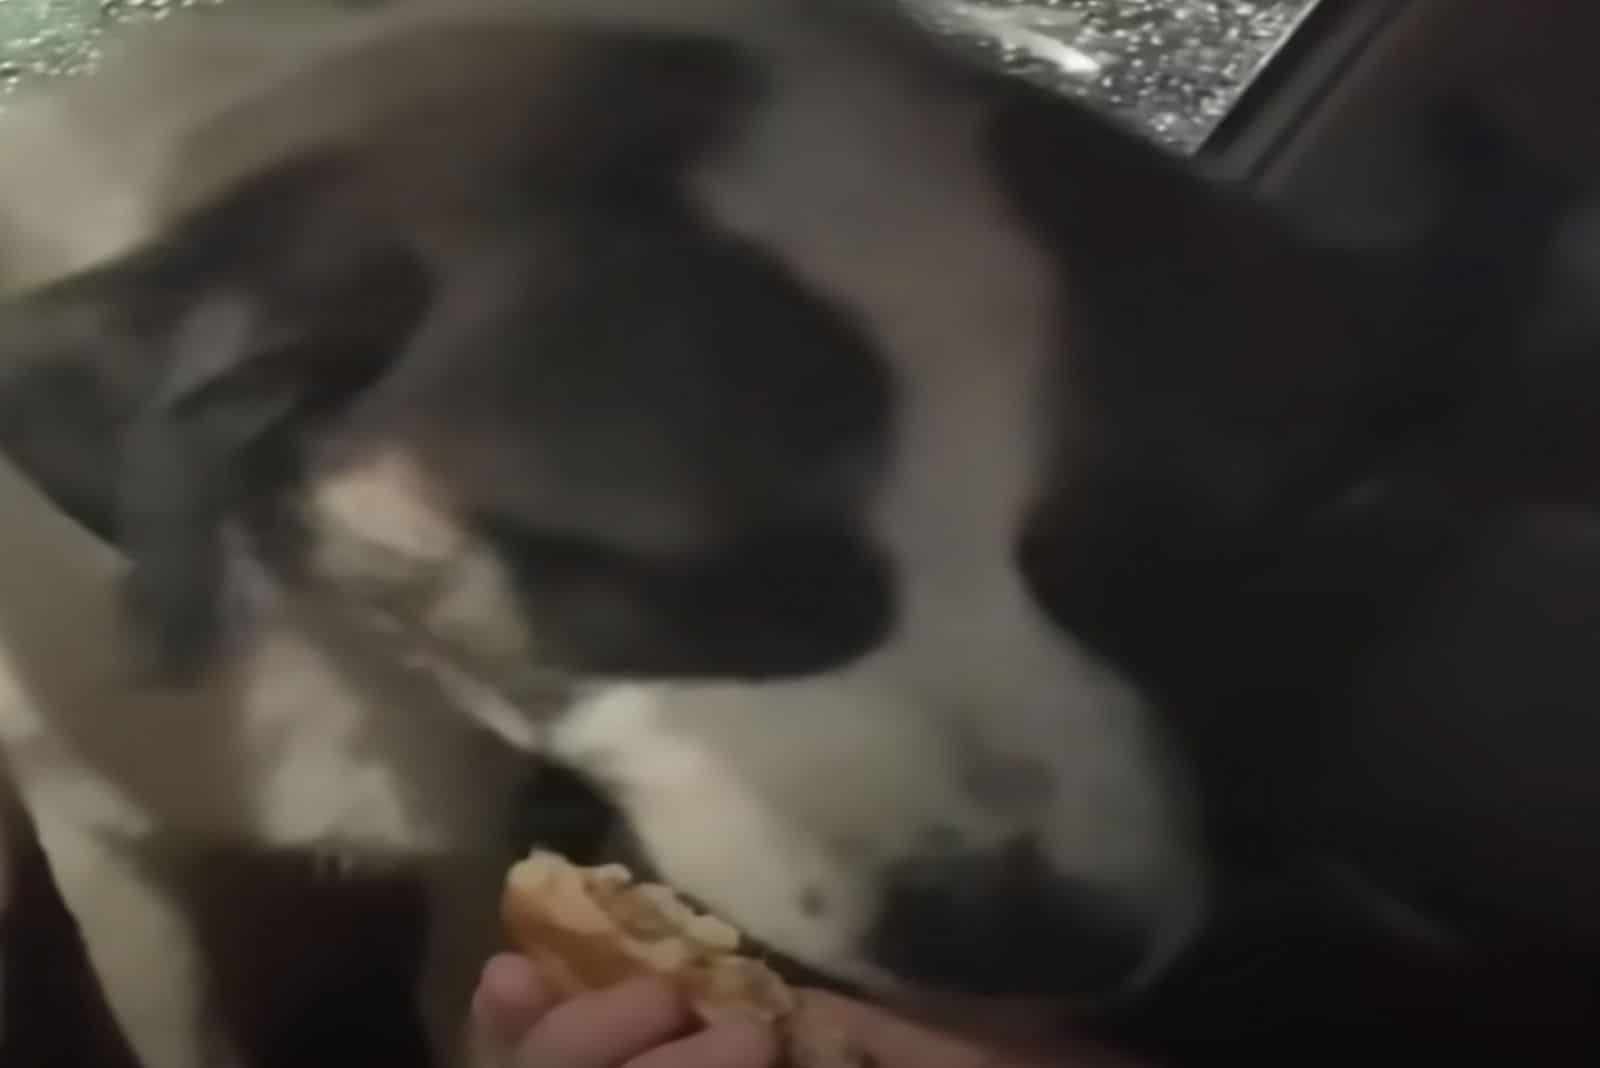 dog eating cheeseburger from owner's hand